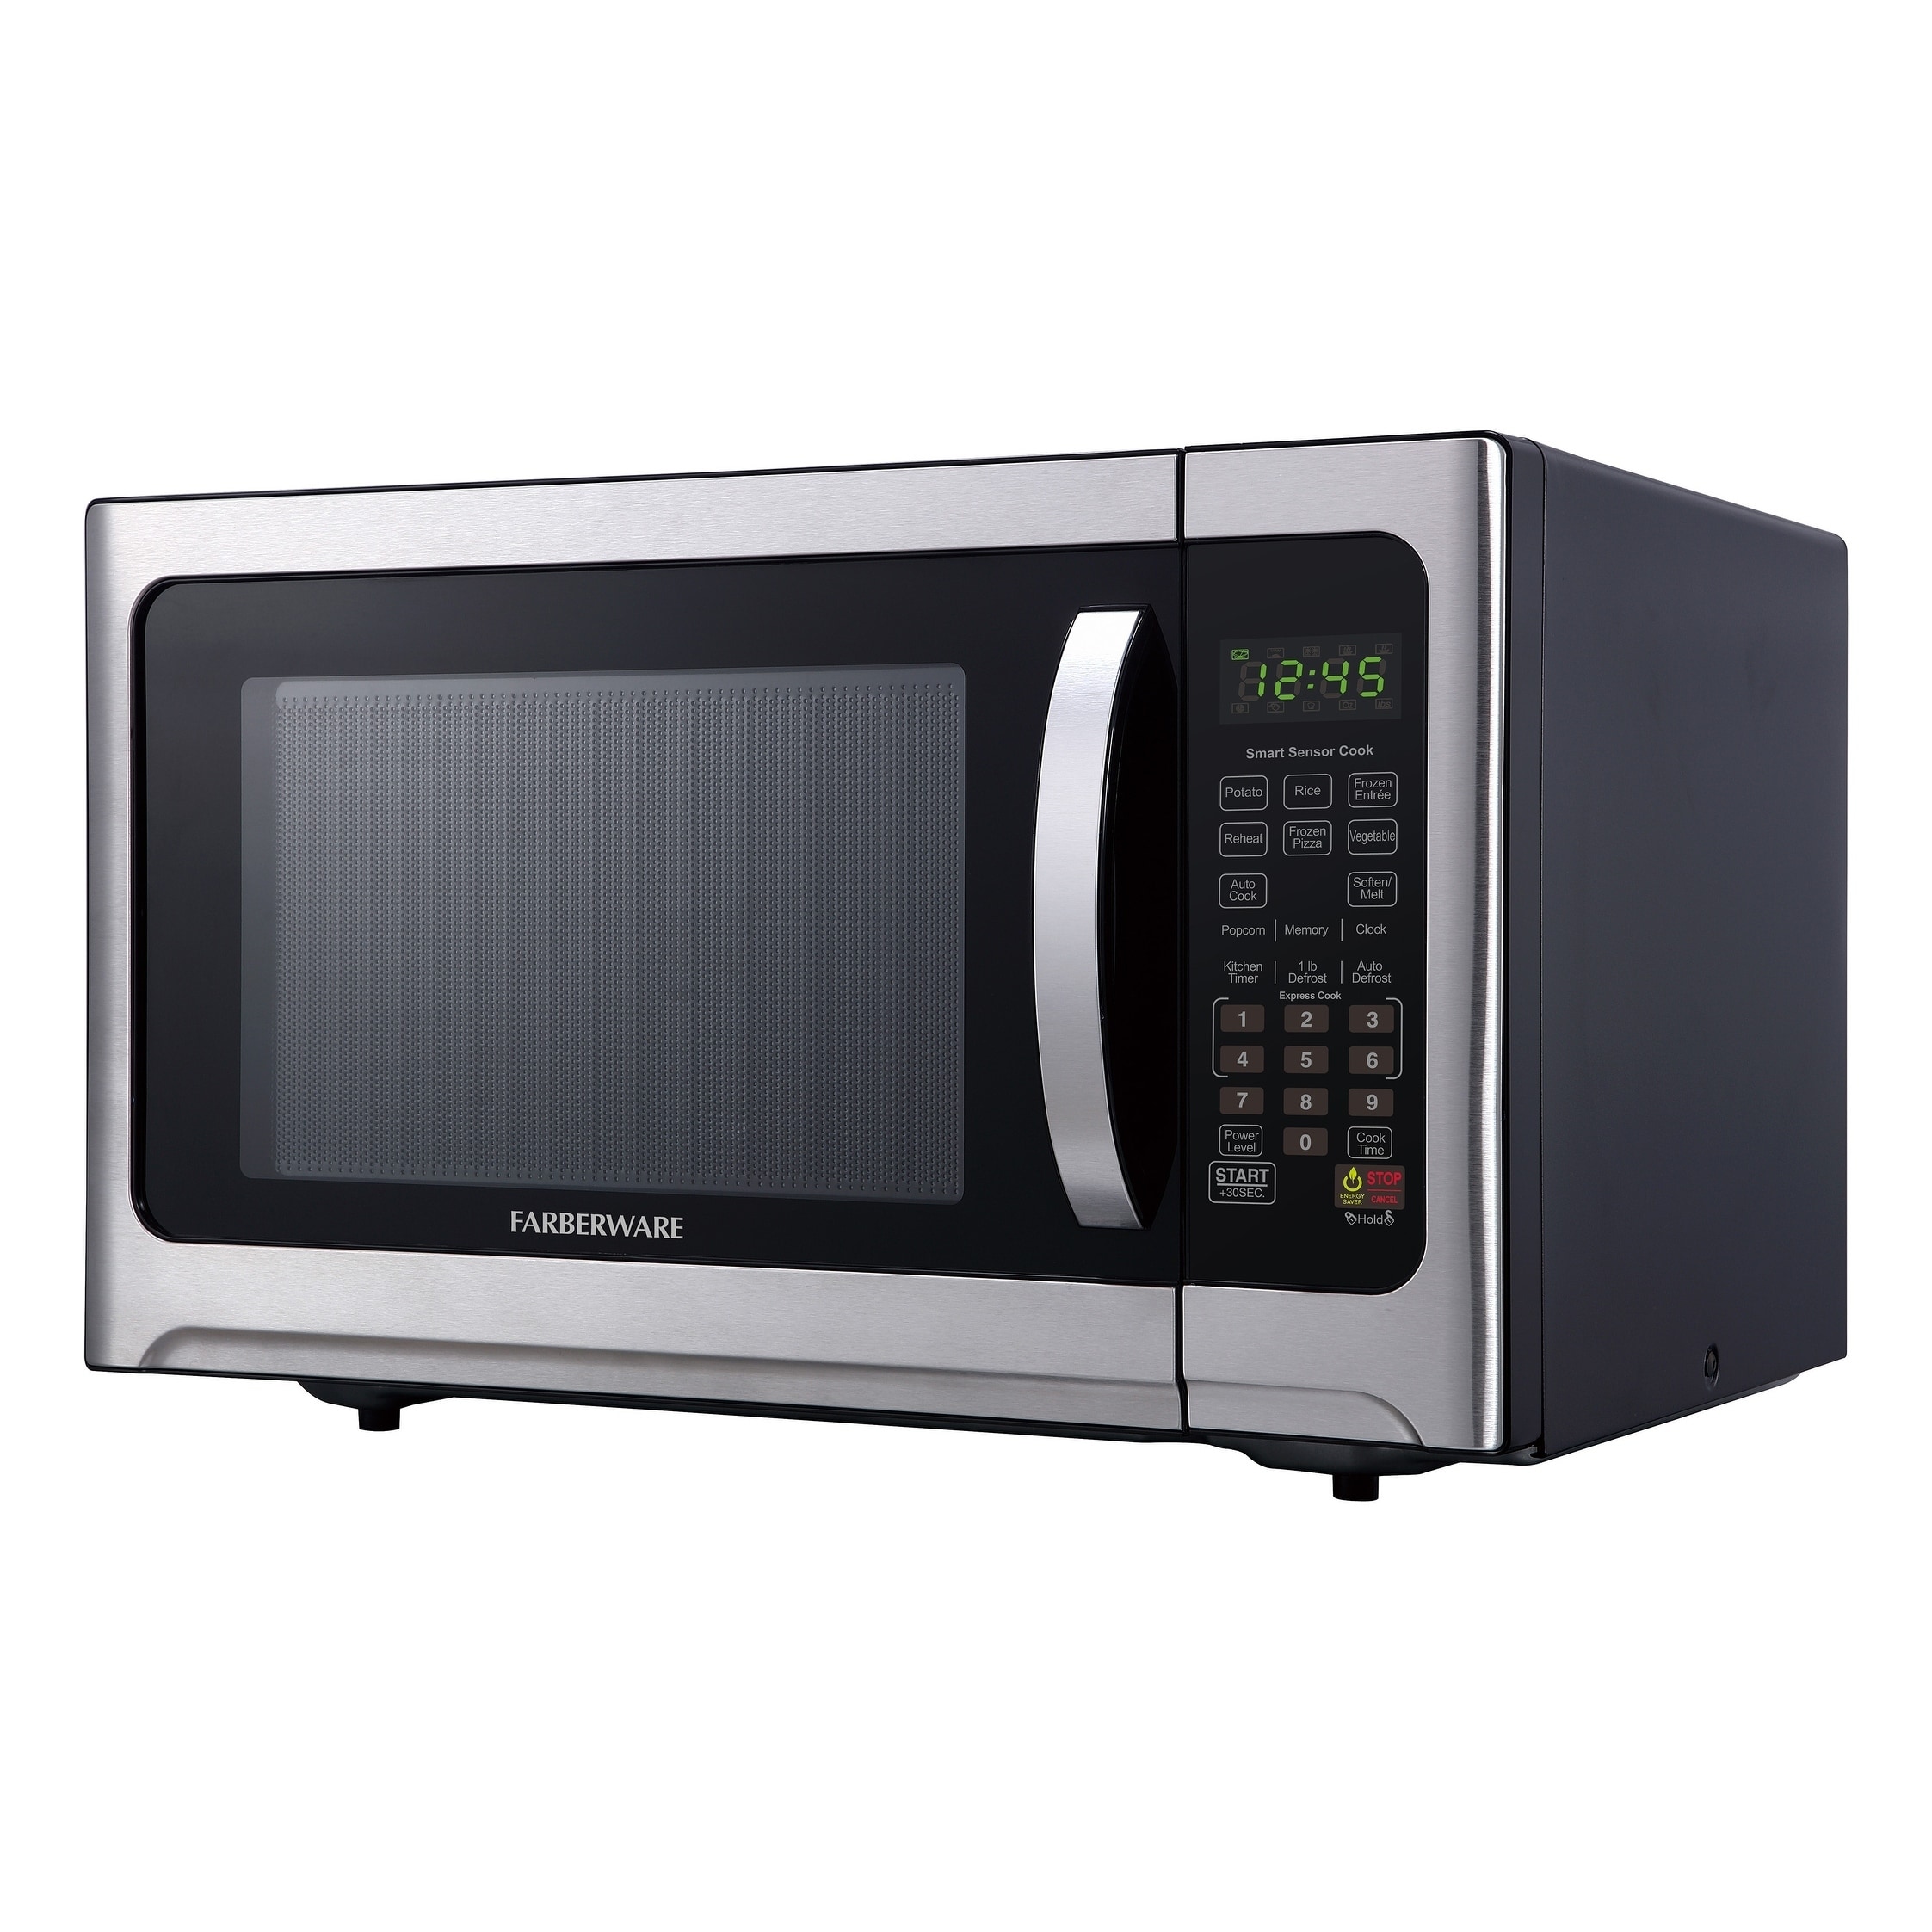 https://ak1.ostkcdn.com/images/products/29057704/Farberware-Professional-FMO12AHTBKE-1.2-Cu.-Ft.-1100-Watt-Microwave-Oven-with-Sensor-Cooking-Stainless-Steel-Black-Body-Wrap-403a0108-8026-464f-83bf-1caf09bb0fd2.jpg